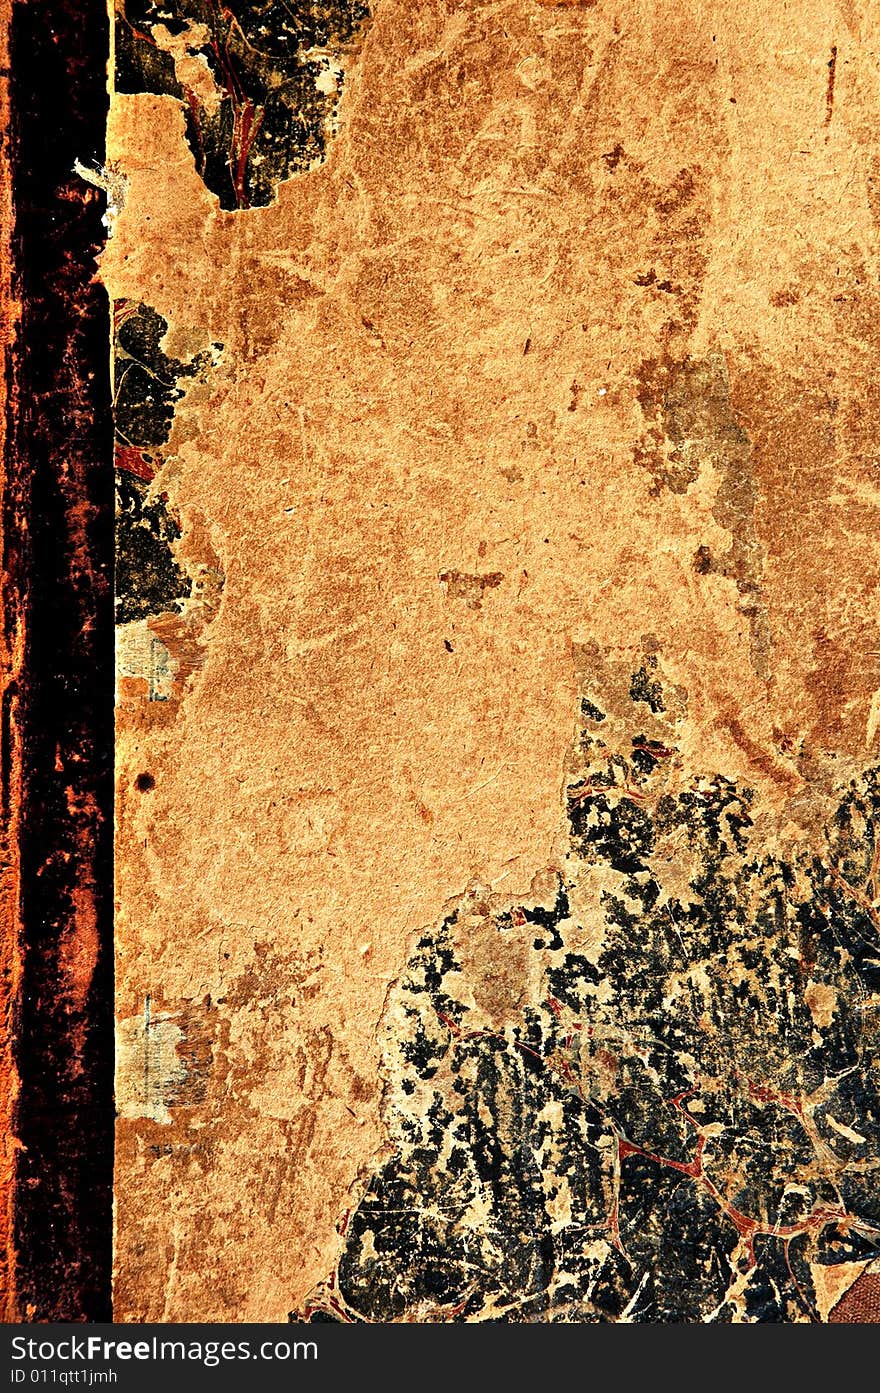 A closeup view of an old, antique book cover suitable for an abstract background. A closeup view of an old, antique book cover suitable for an abstract background.